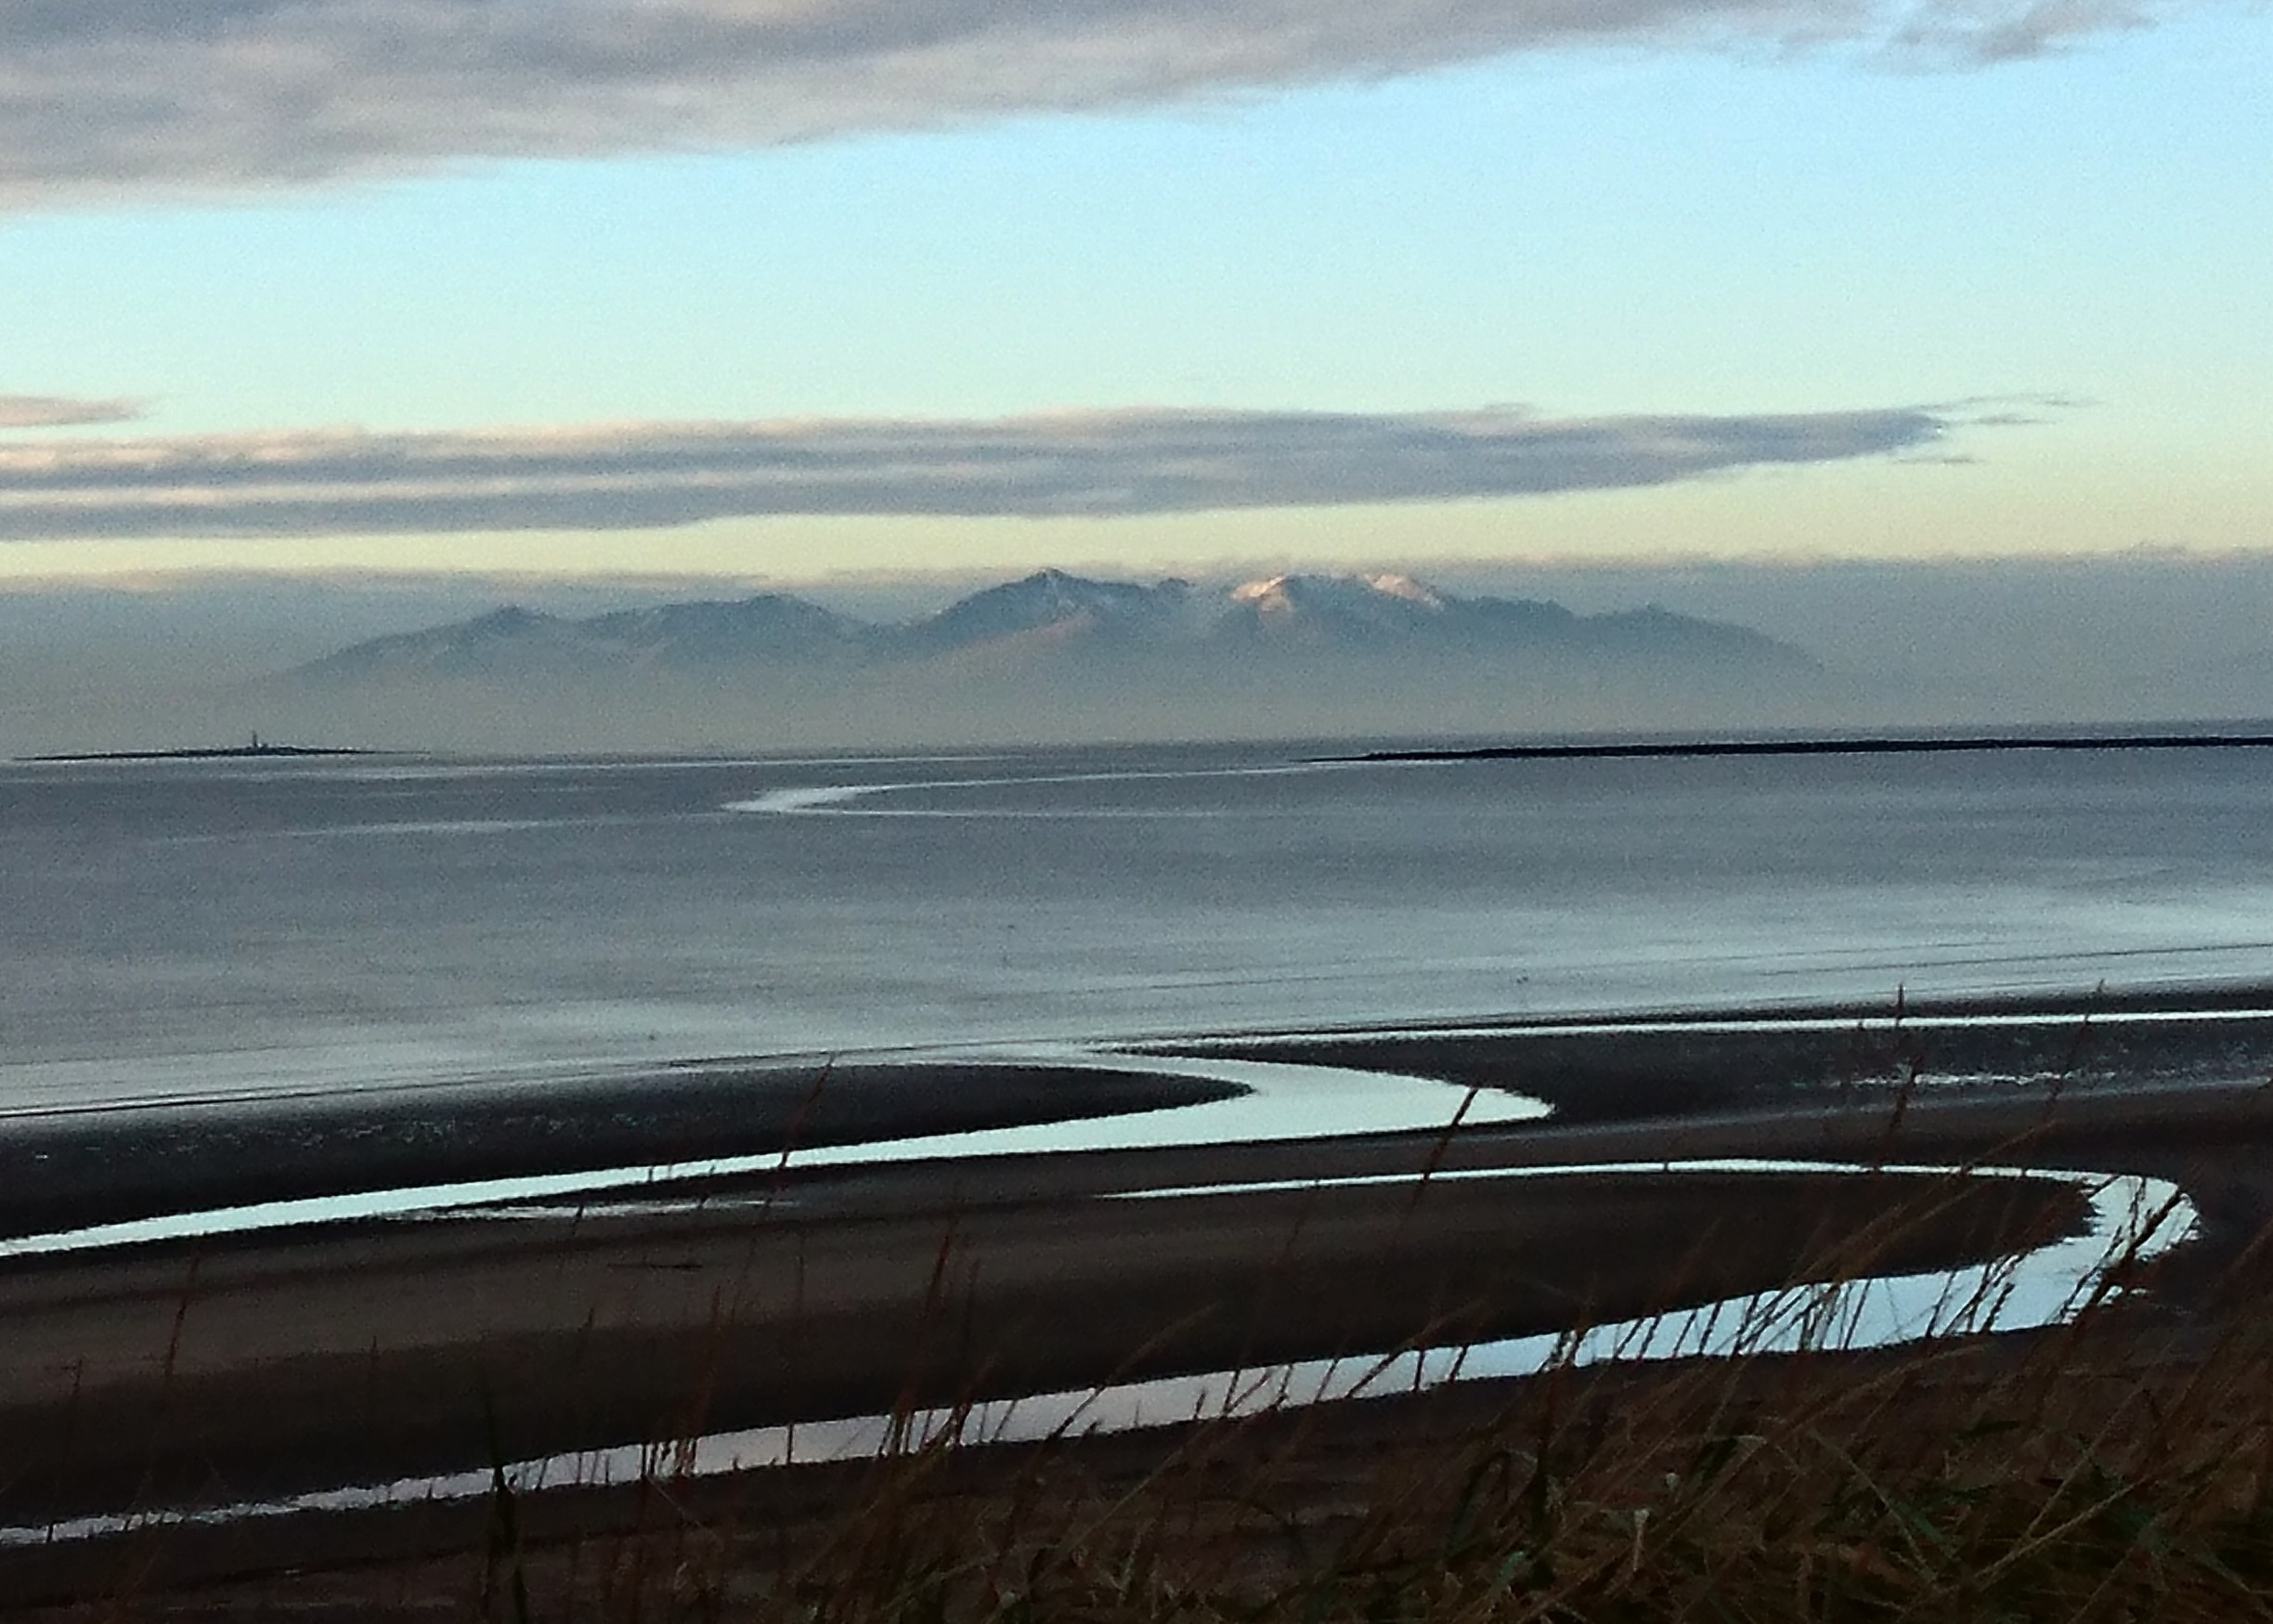 Beautiful view of Arran from Royal Troon Golf Course on my morning walk today.